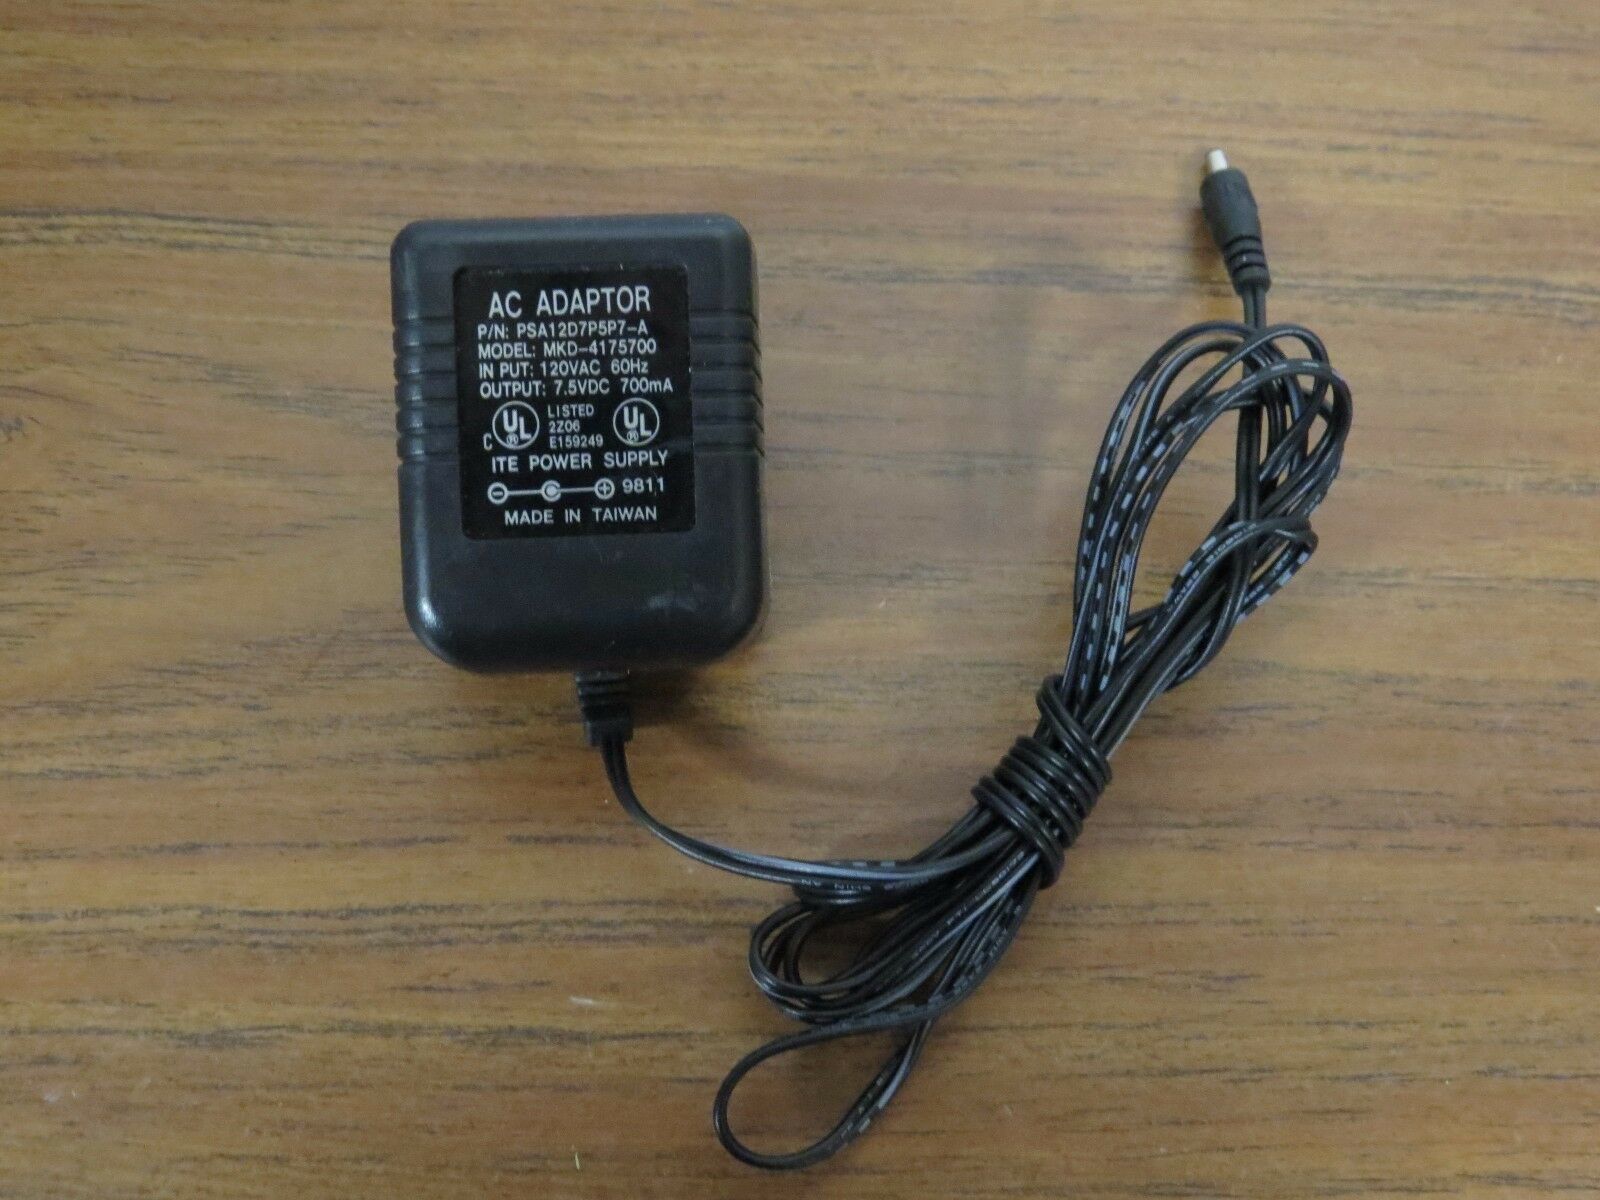 ITE 7.5V,700mA AC/DC POWER SUPPLY ADAPTER CORD MKD-4175700 Brand: Unbranded/Ge